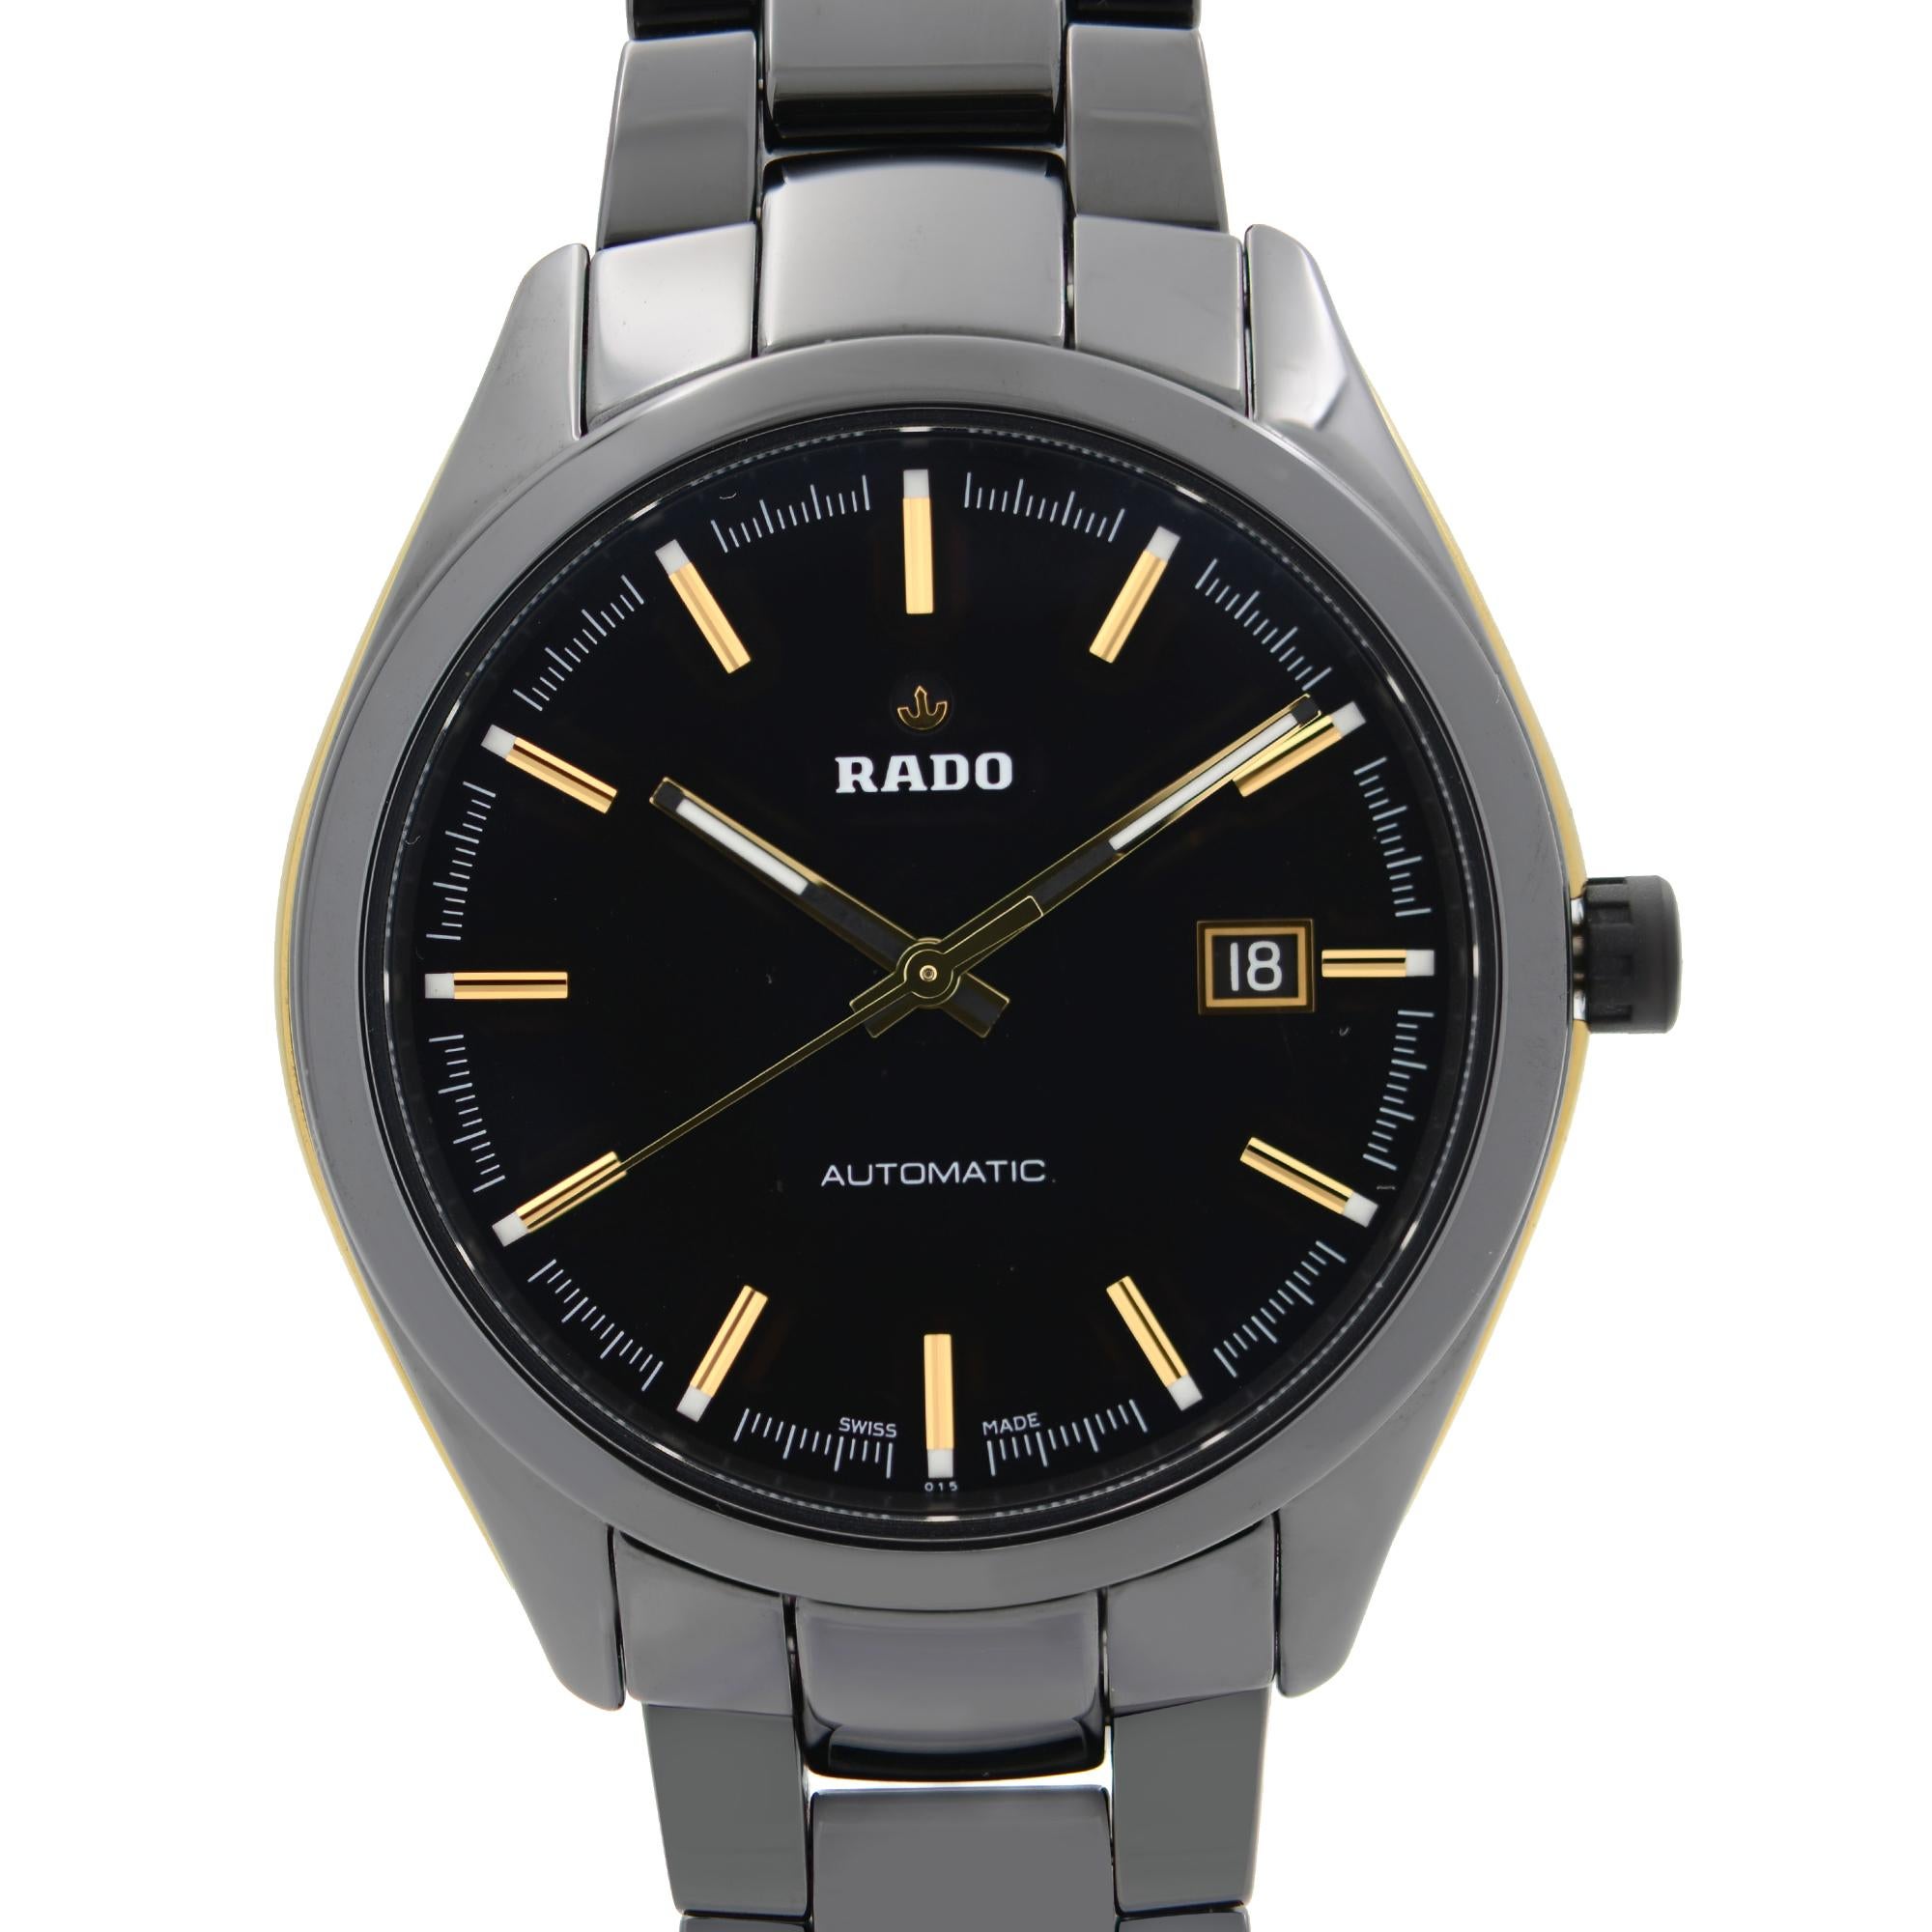 Pre-owned Rado HyperChrome High-Tech Ceramic Steel Black Dial Automatic Men's Watch R32253152. The Watch has Tiny Scratches on Gold Tone Parts. No Original Box and Papers are Included. Comes with Chronostore Presentation Box and Authenticity Card.